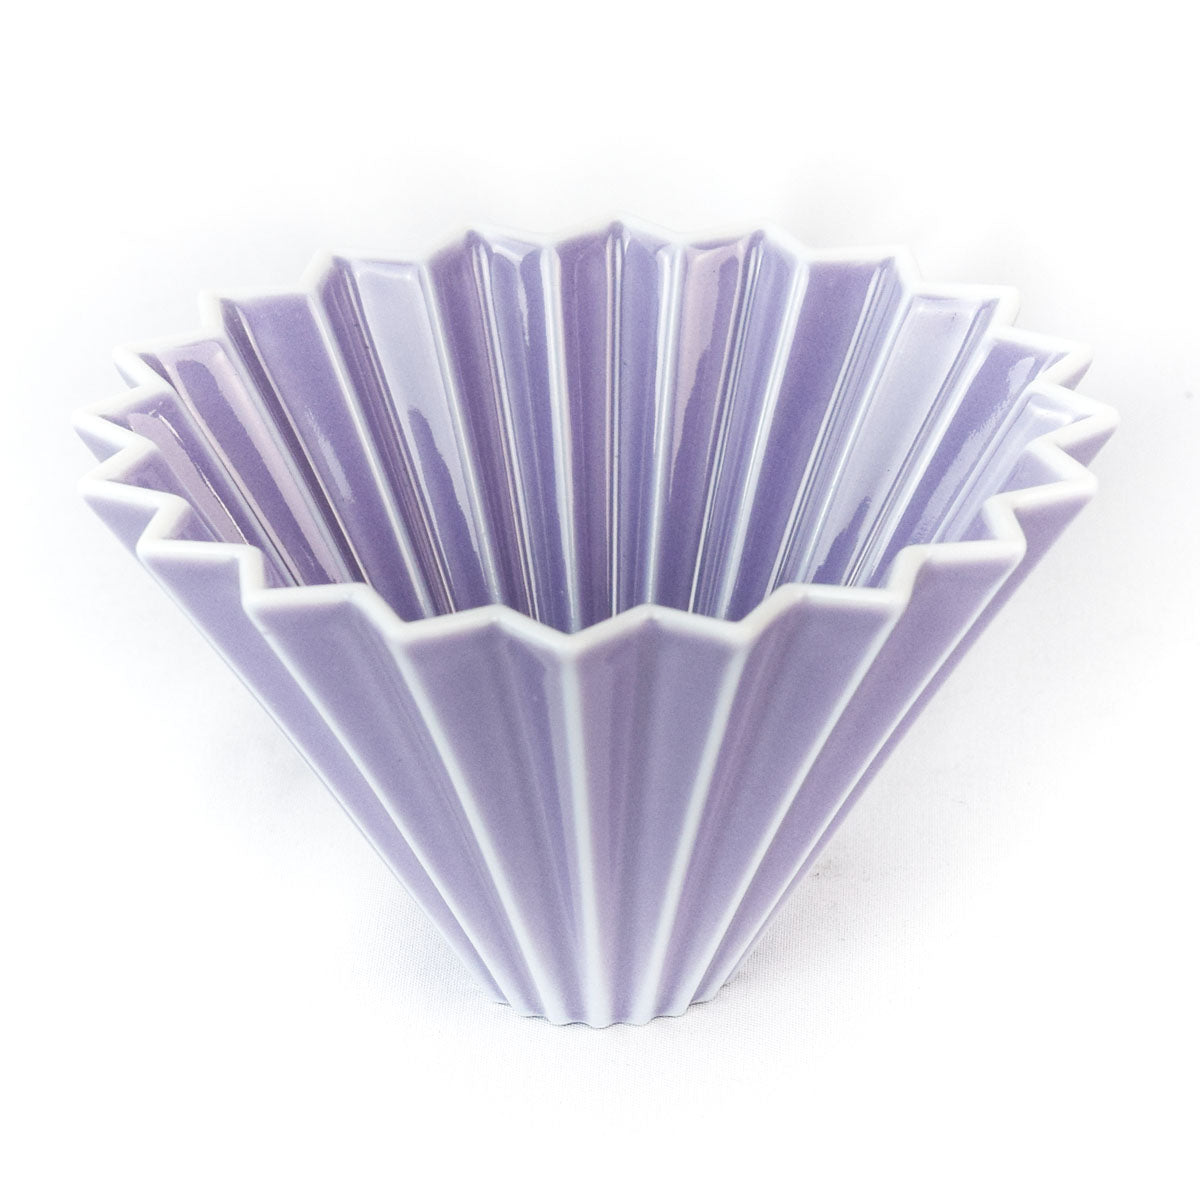 PURPLE ORIGAMI COFFEE DRIPPER, MADE IN JAPAN WITH MINO PORCELAIN, IT LOOKS LIKE A FOLDED ORIGAMI JUST LIKE ITS NAME SUGGESTS. 